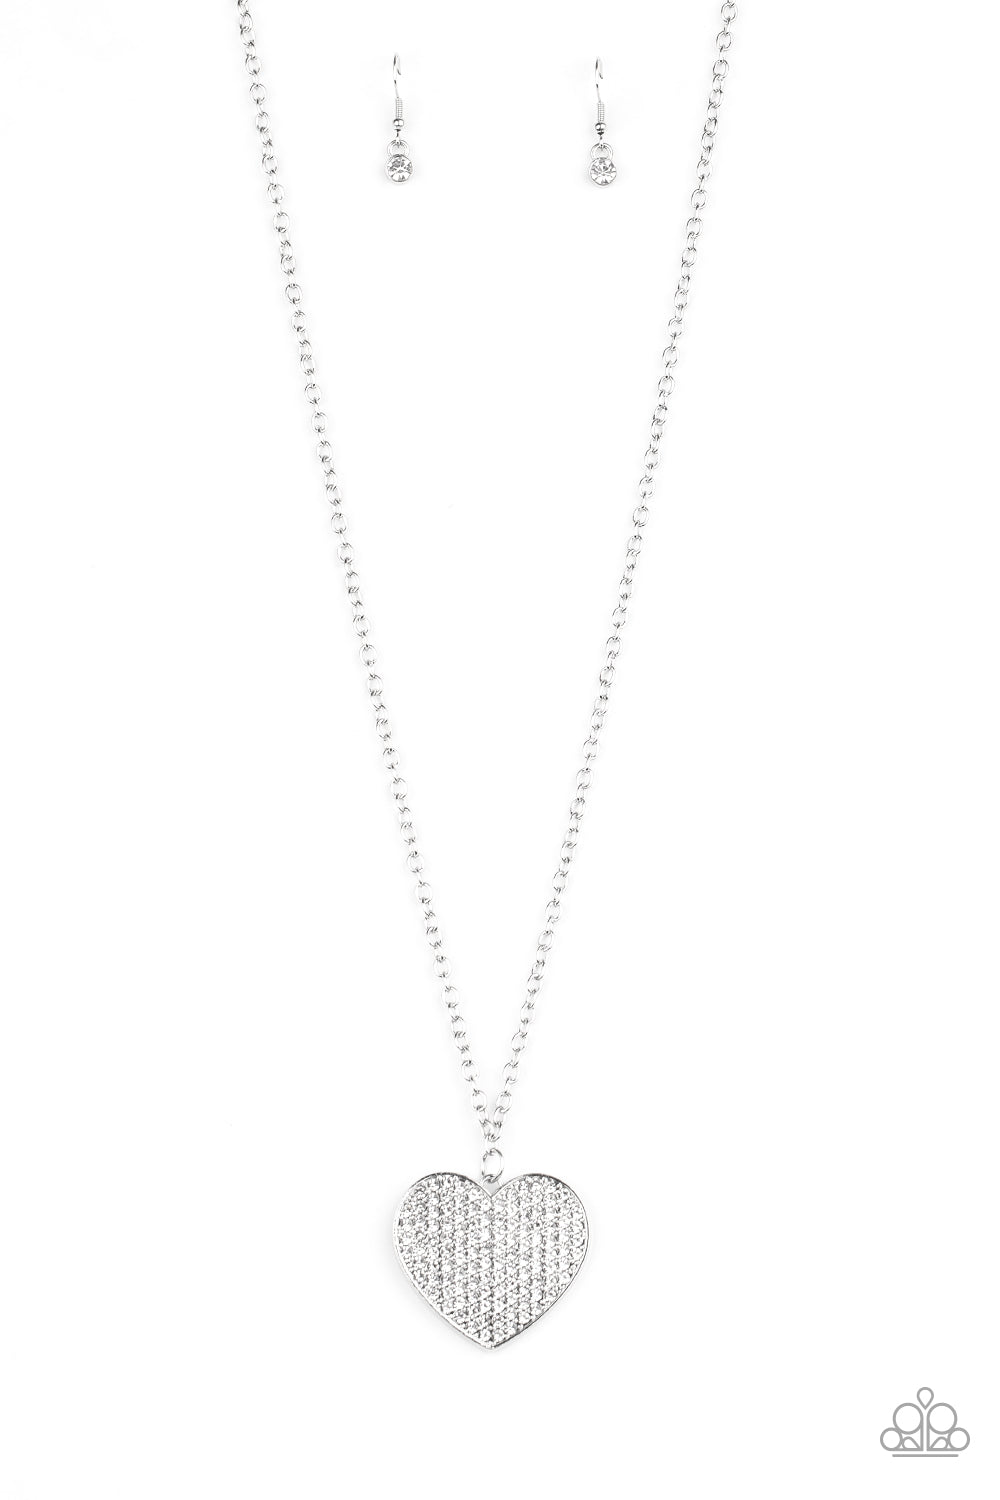 Paparazzi Accessories - Have To Learn The HEART Way - White Necklace